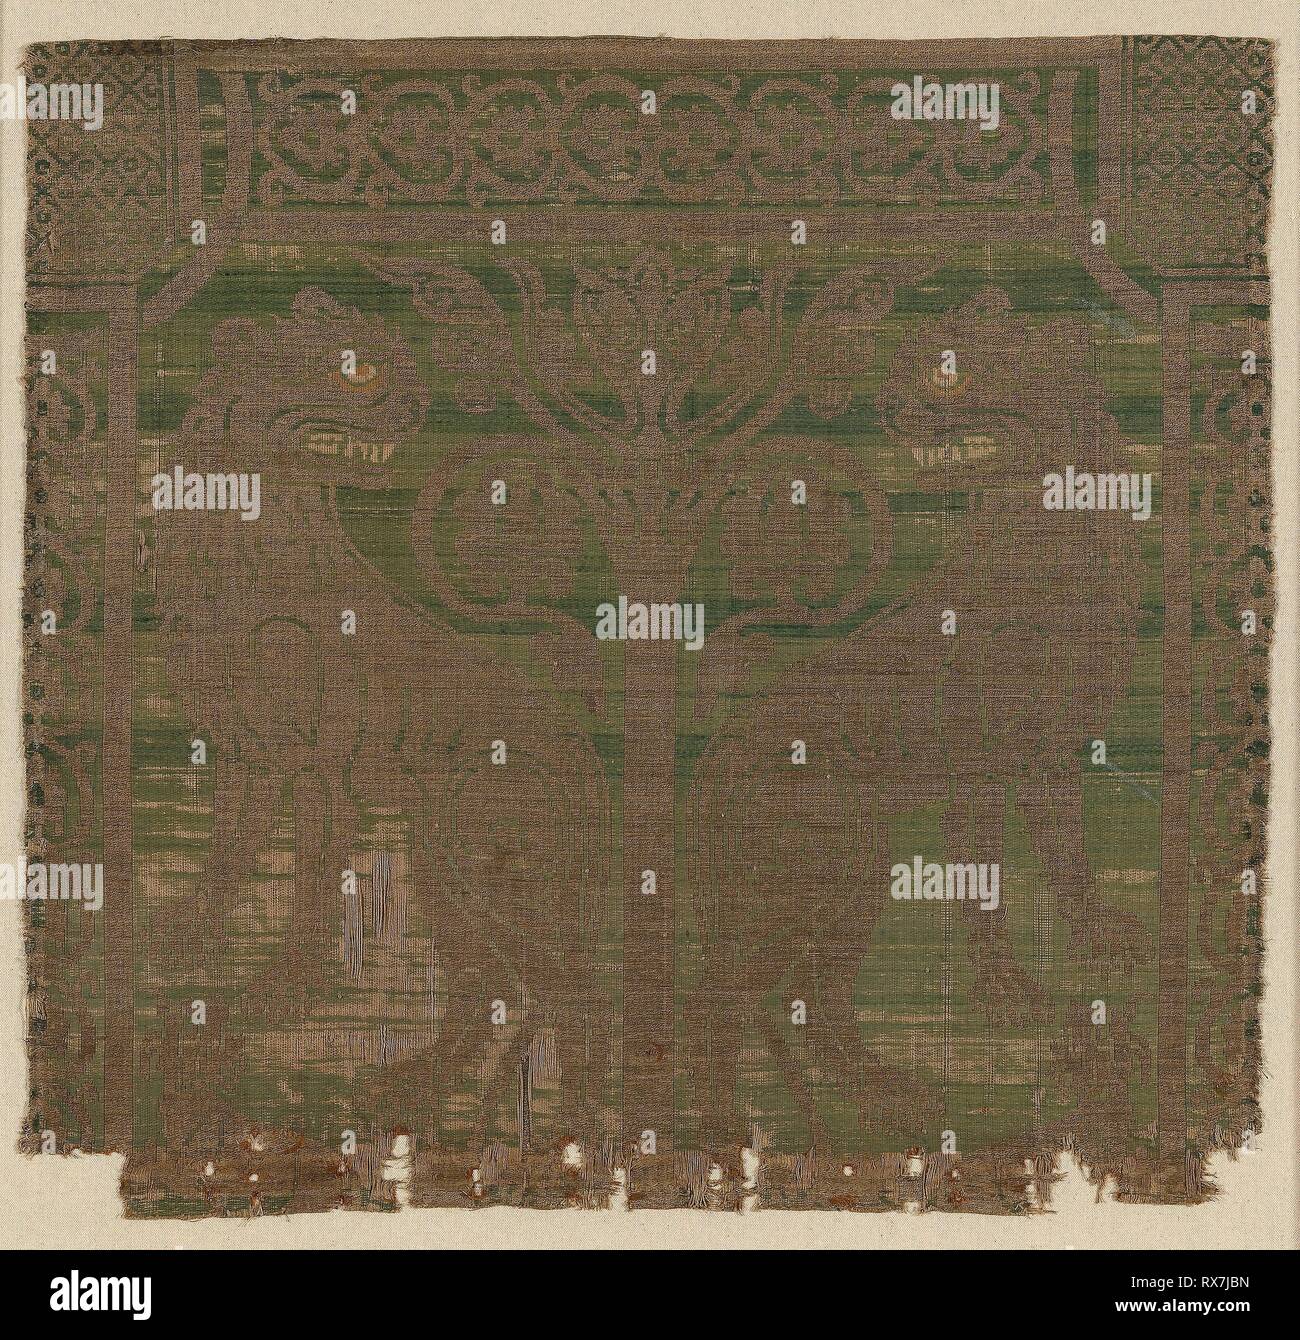 Fragment. Spain or Sicily. Date: 1201-1300. Dimensions: 57.4 x 60.9 cm (22 5/8 x 24 in.)  Weft: point repeat. Silk, linen, and gilt-animal-substrate-wrapped linen, complementary weft twill weave with inner warps. Origin: Spain. Museum: The Chicago Art Institute. Stock Photo